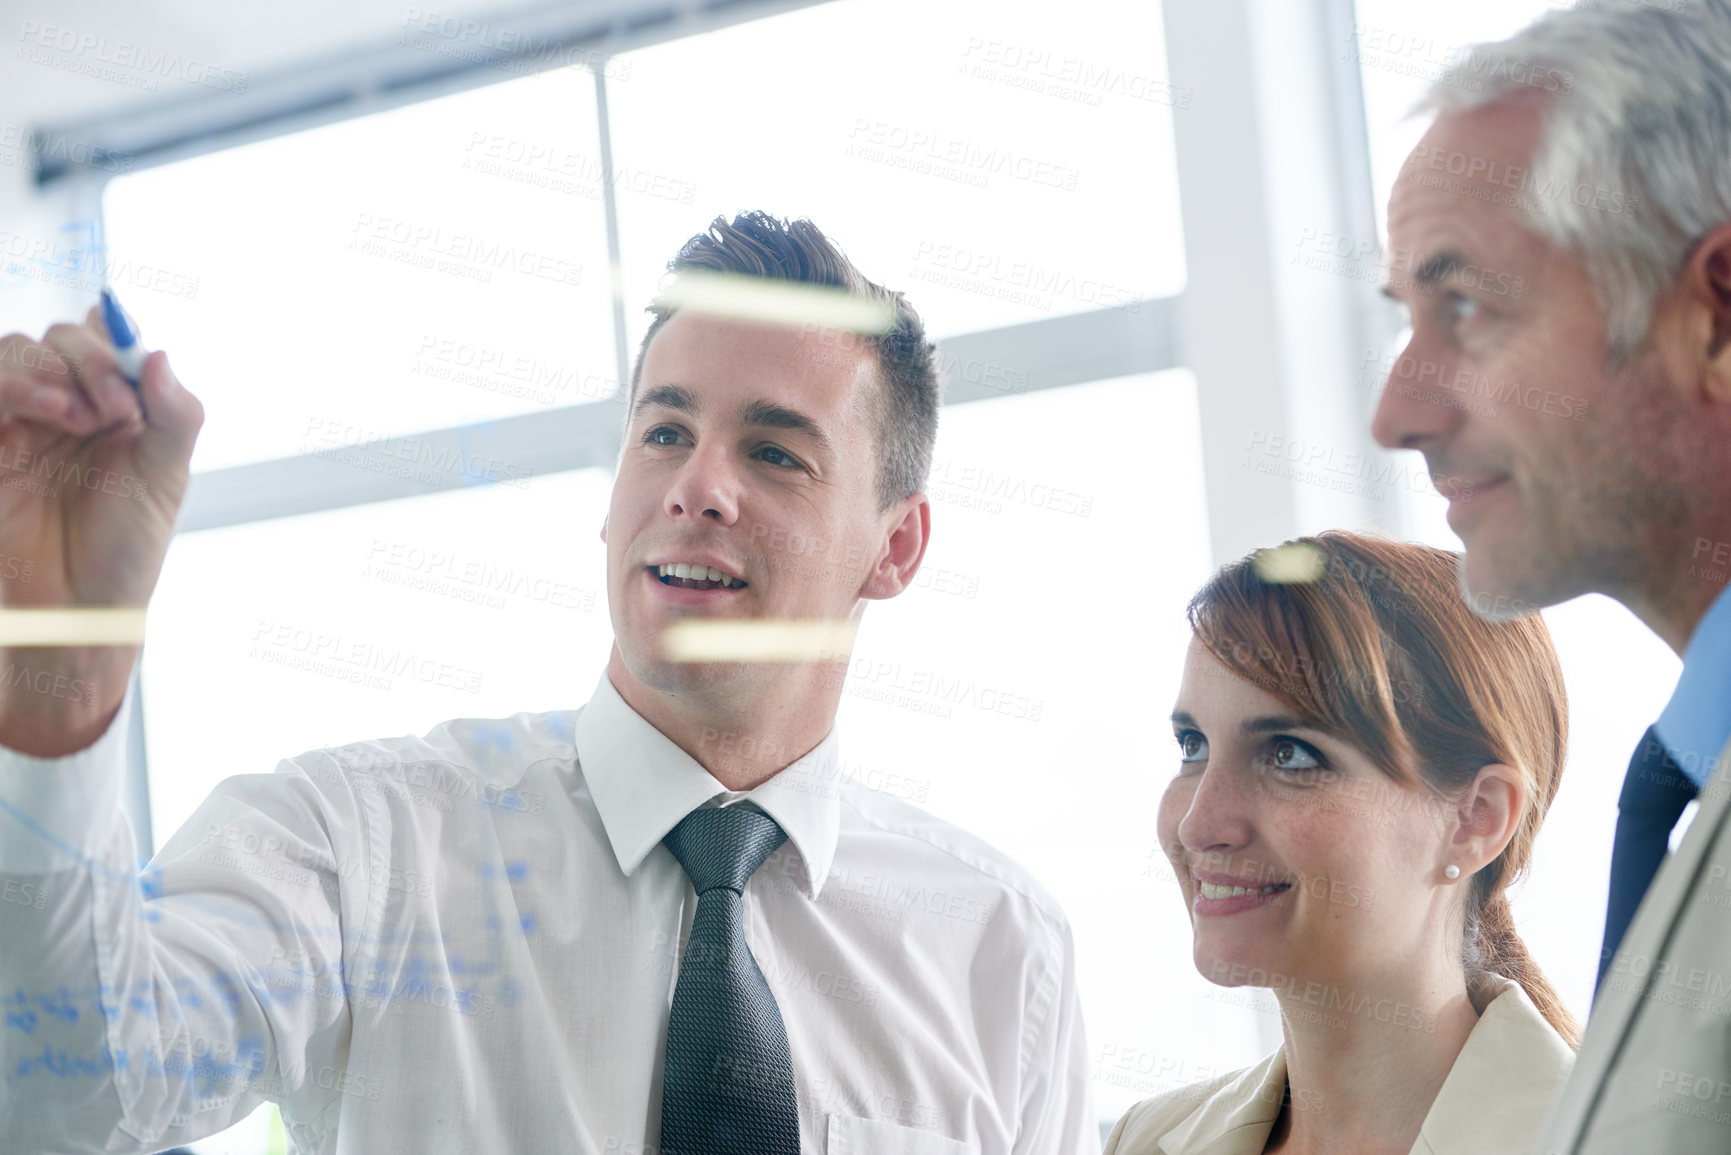 Buy stock photo Shot of businesspeople brainstorming on glass wall in an office